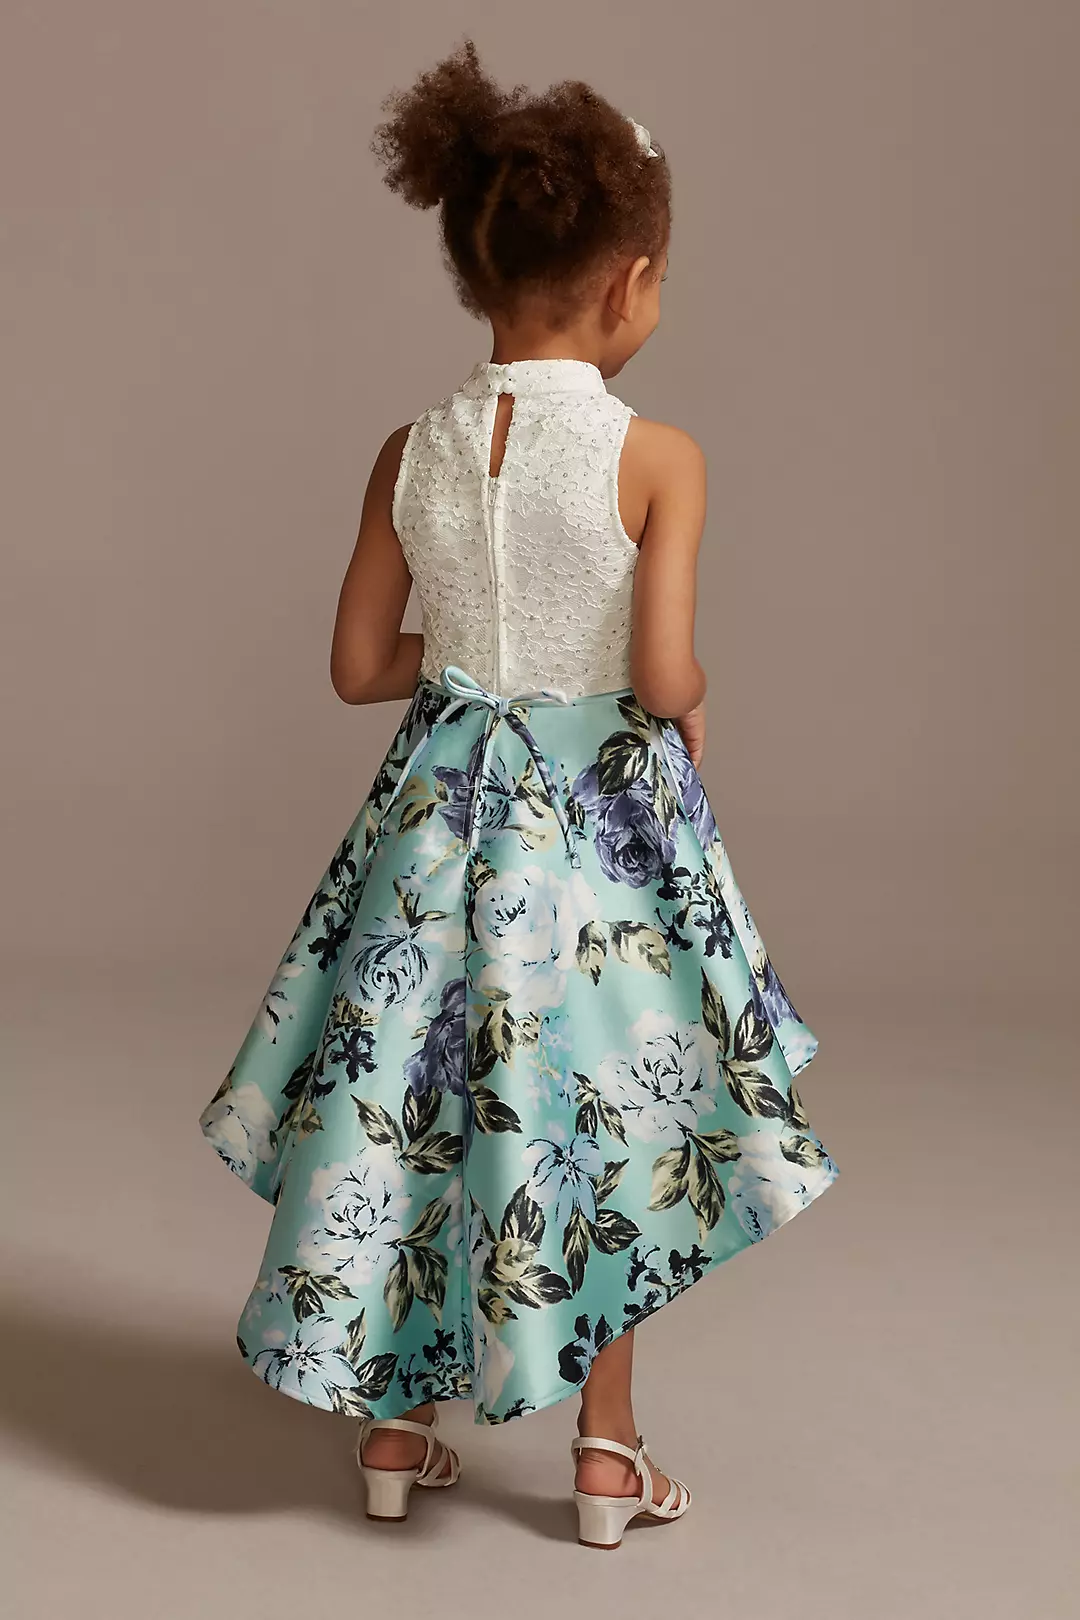 Lace Mock Neck High-Low Printed Flower Girl Dress Image 2